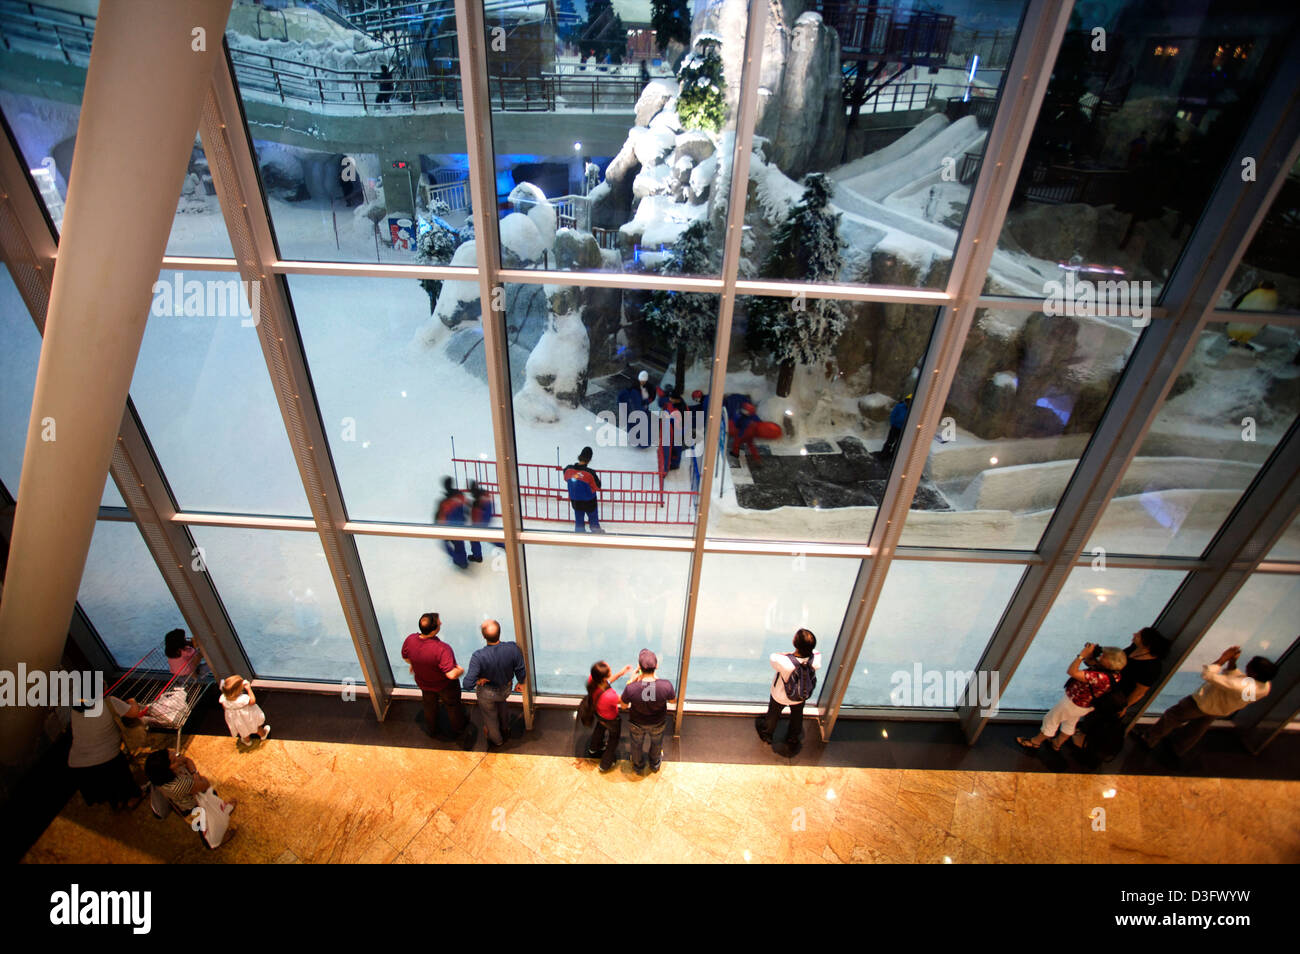 Onlookers looking into the Ski Dubai facility in Mall of the Emirates, the world's first shopping resort based in Dubai. Stock Photo